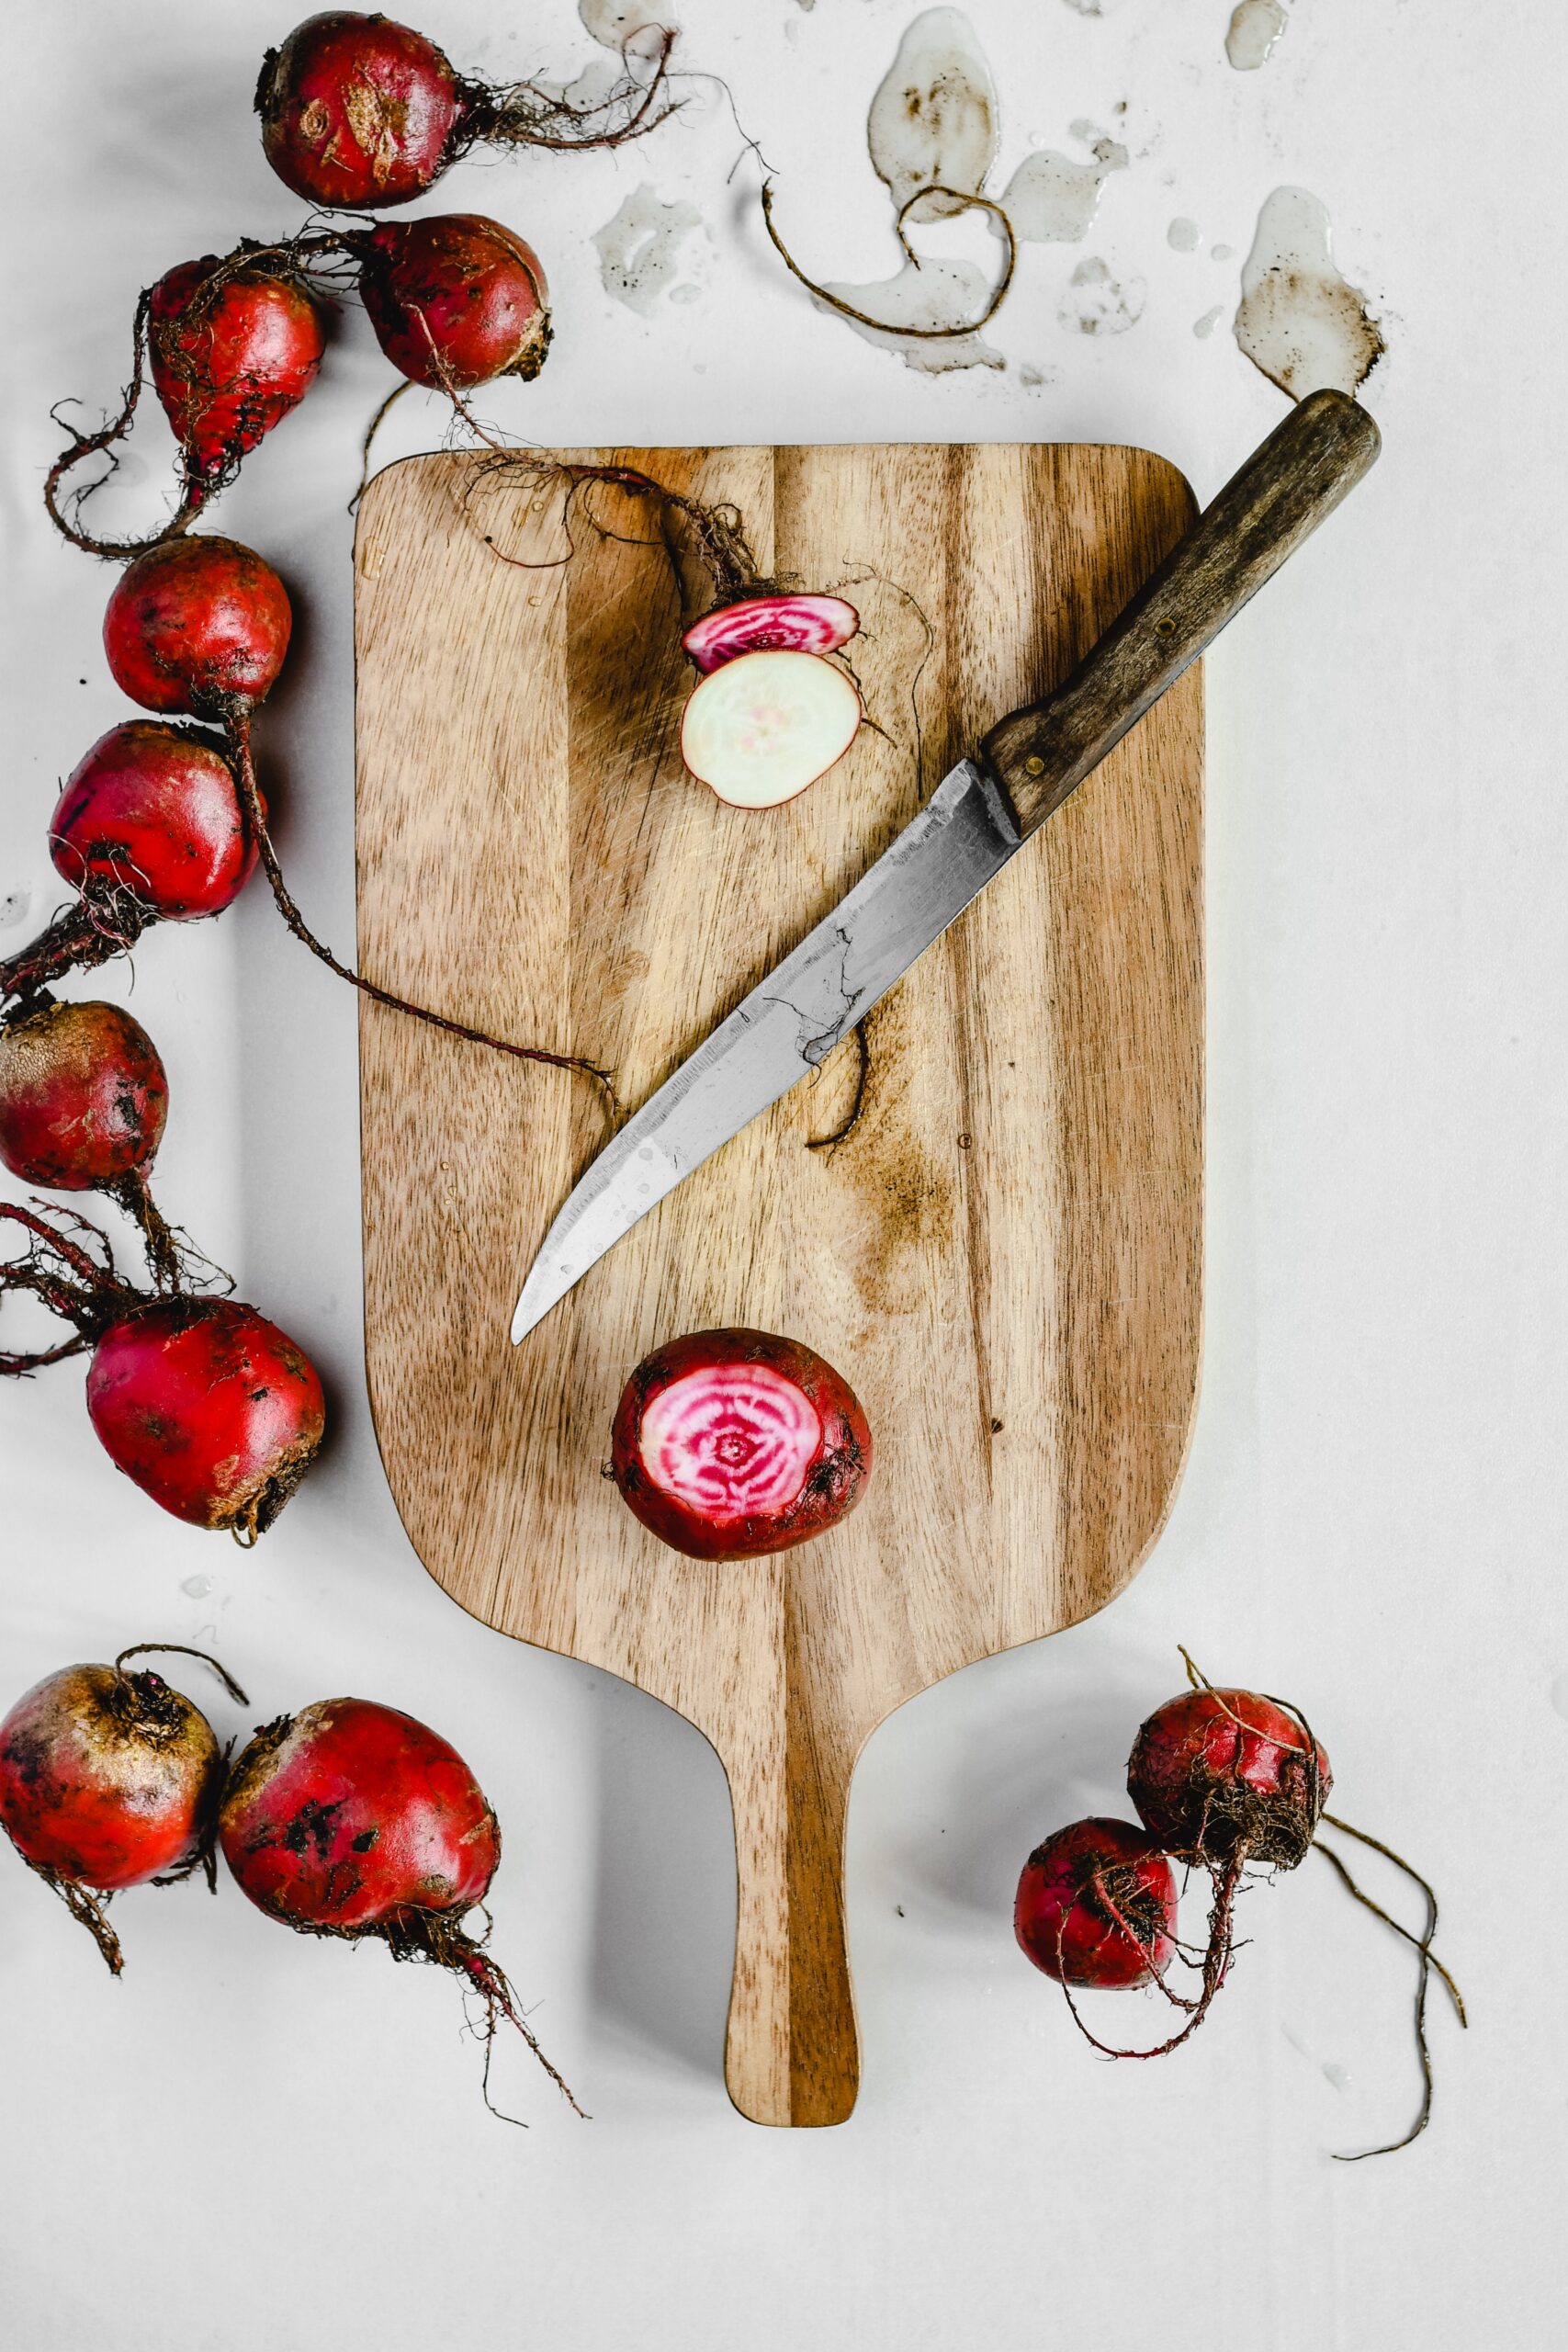 A cutting board surrounded by beetroots image